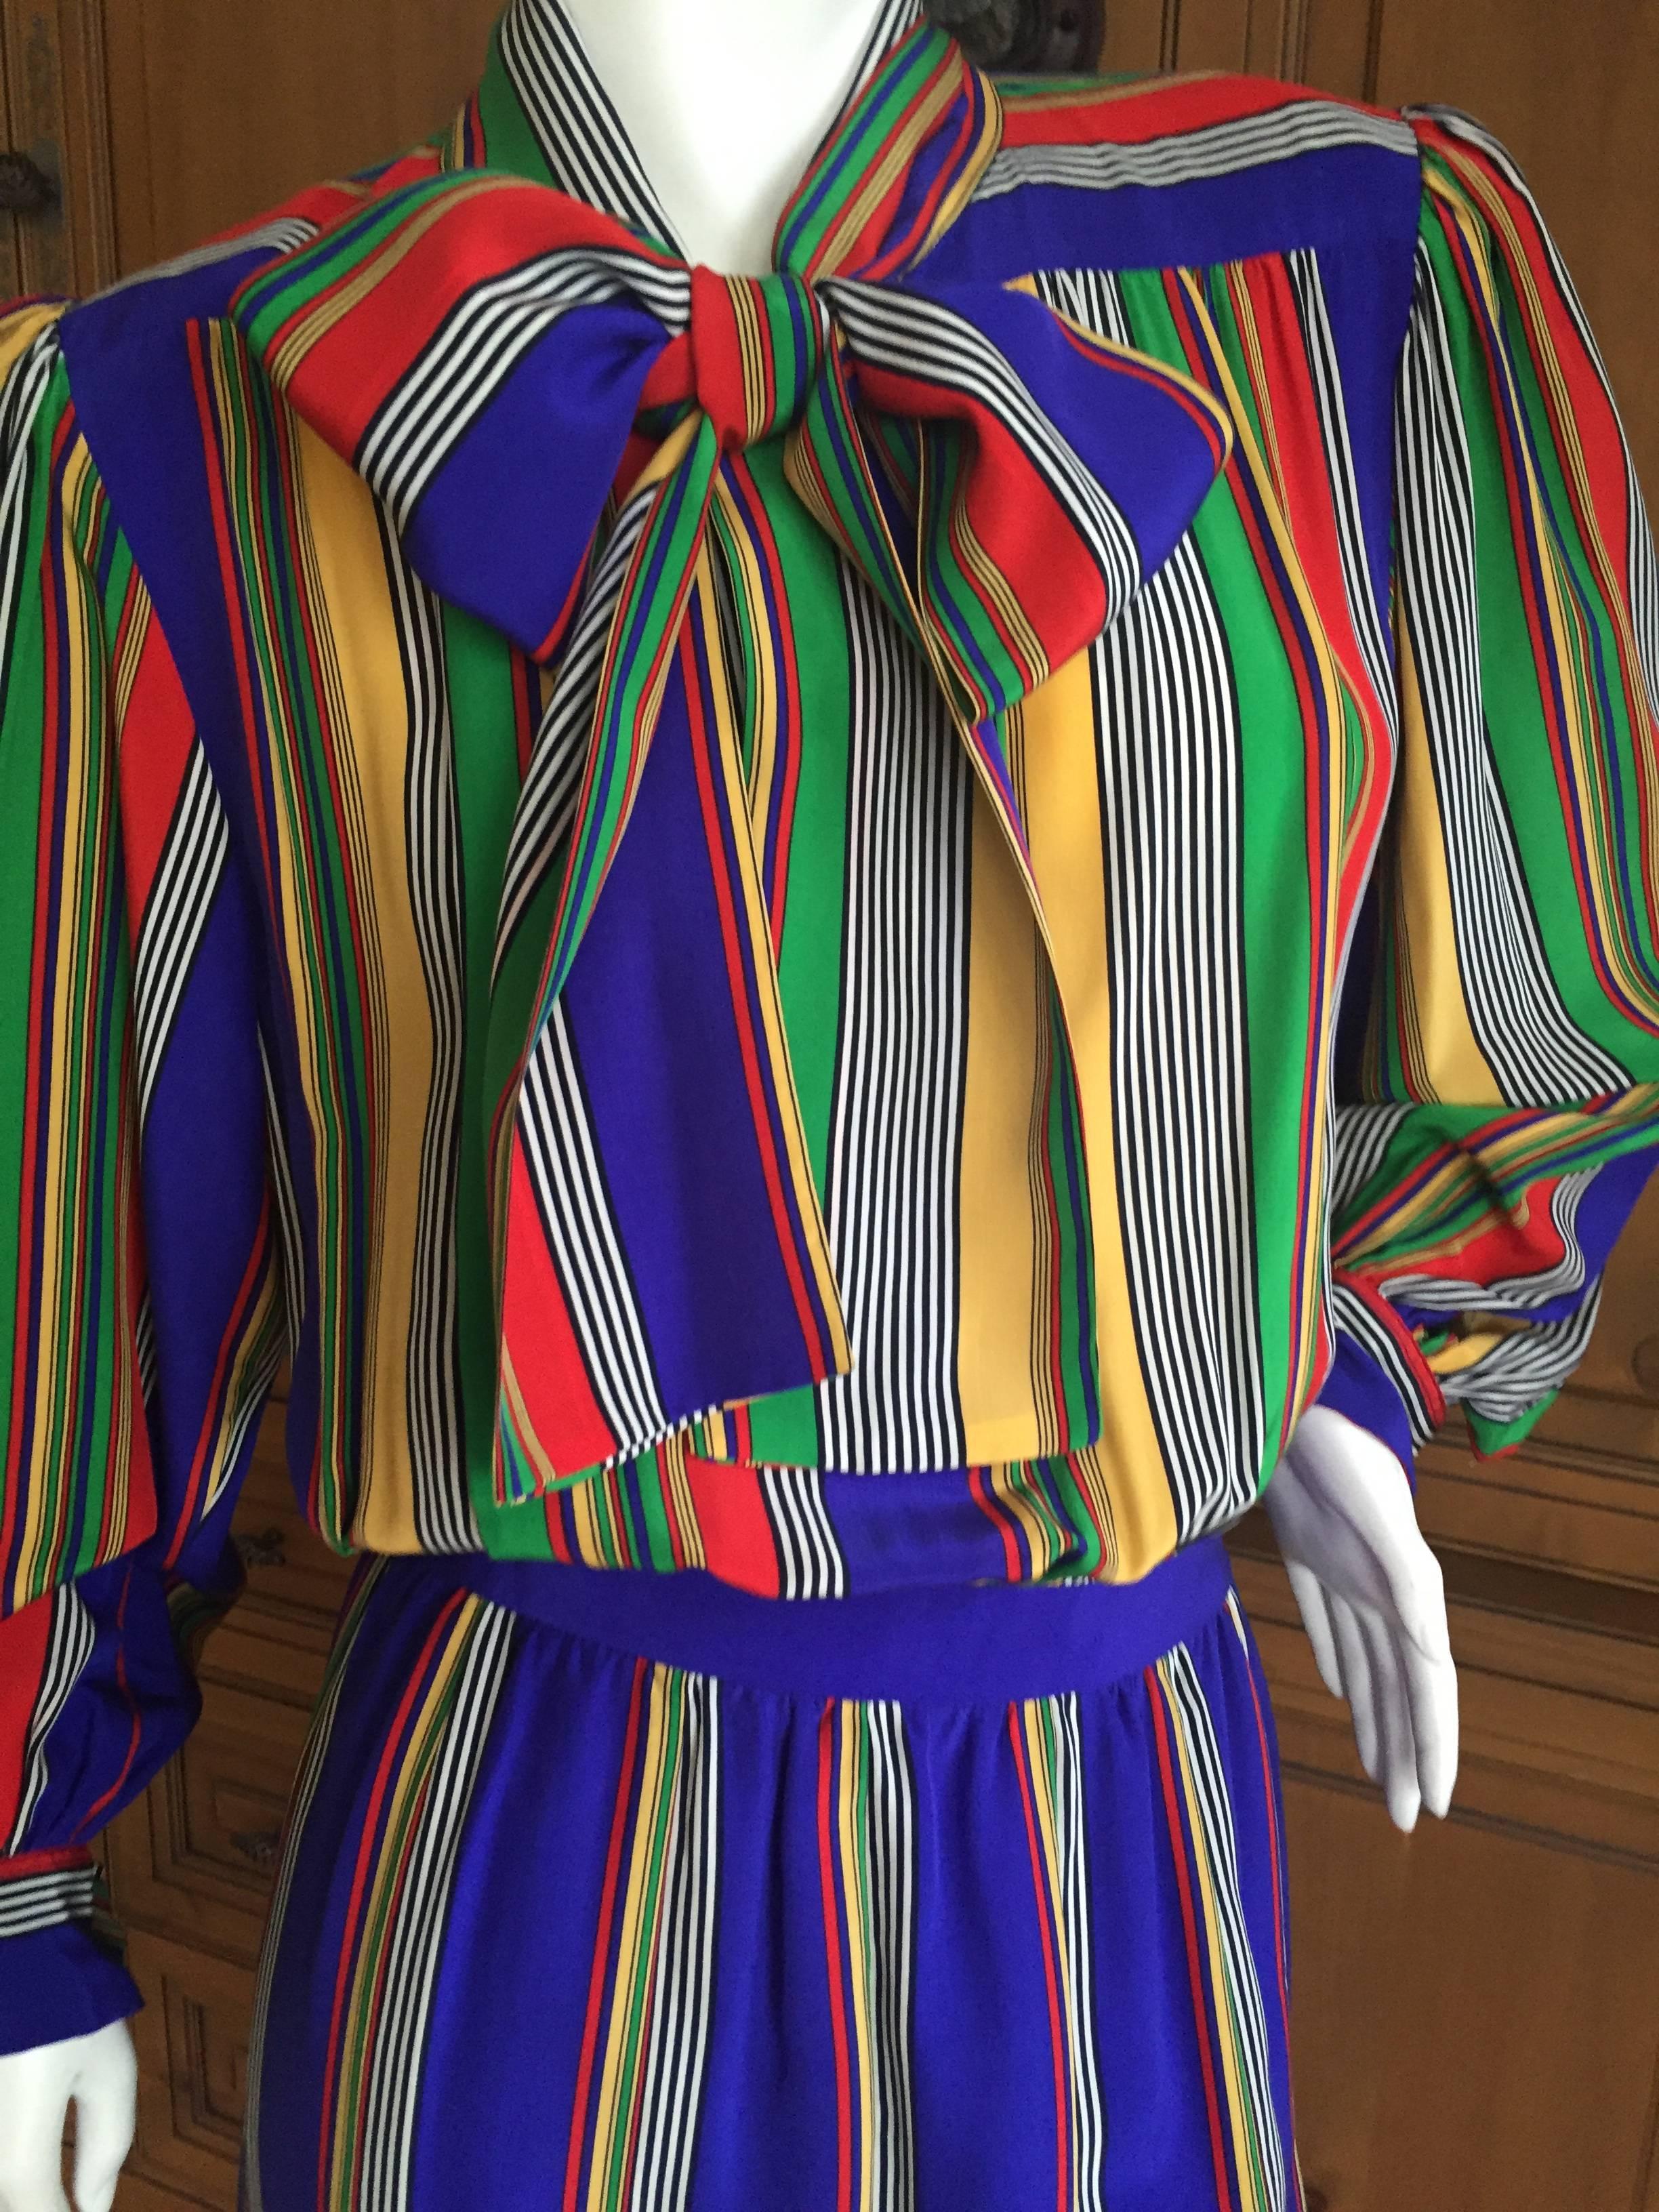 Yves Saint Laurent Rive Gauche 1970's Stripe Silk Day Dress with Bow.
So delightfully French, with pleated skirt.
Size 36
Bust 42"
Was it 25"
Hips 38"
Length 42"
In excellent condition